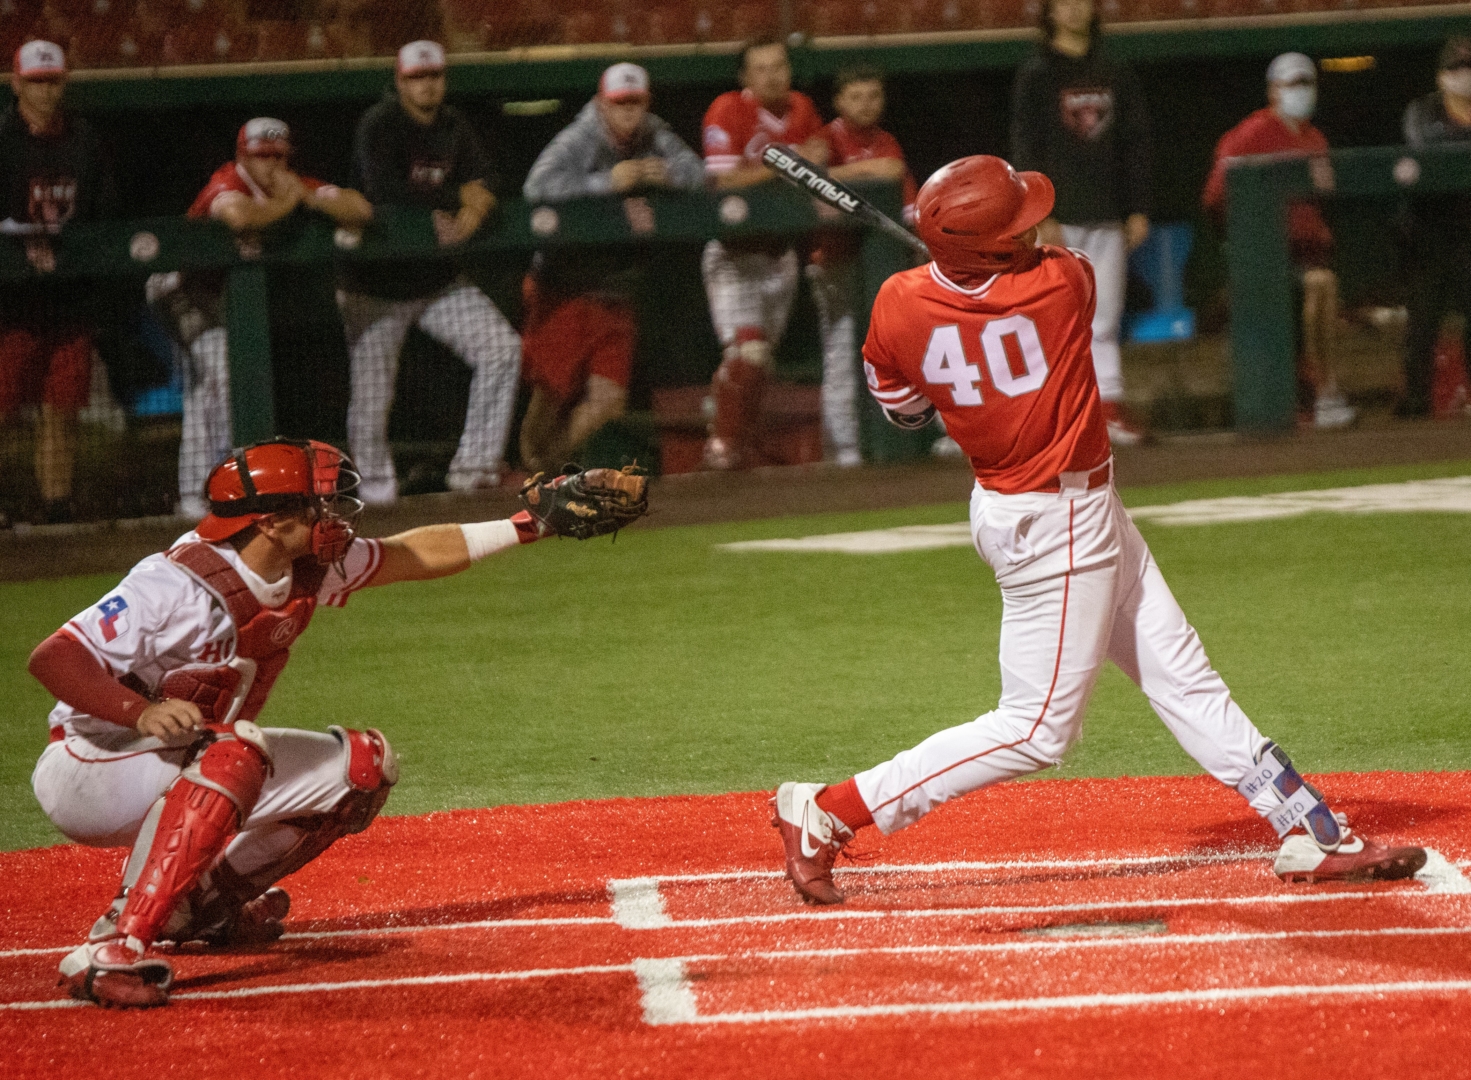 Houston first baseman Ryan Hernandez takes a swing at a pitch during the first game of the red-white series at Schroeder Park on Friday evening. | Andy Yanez/The Cougar